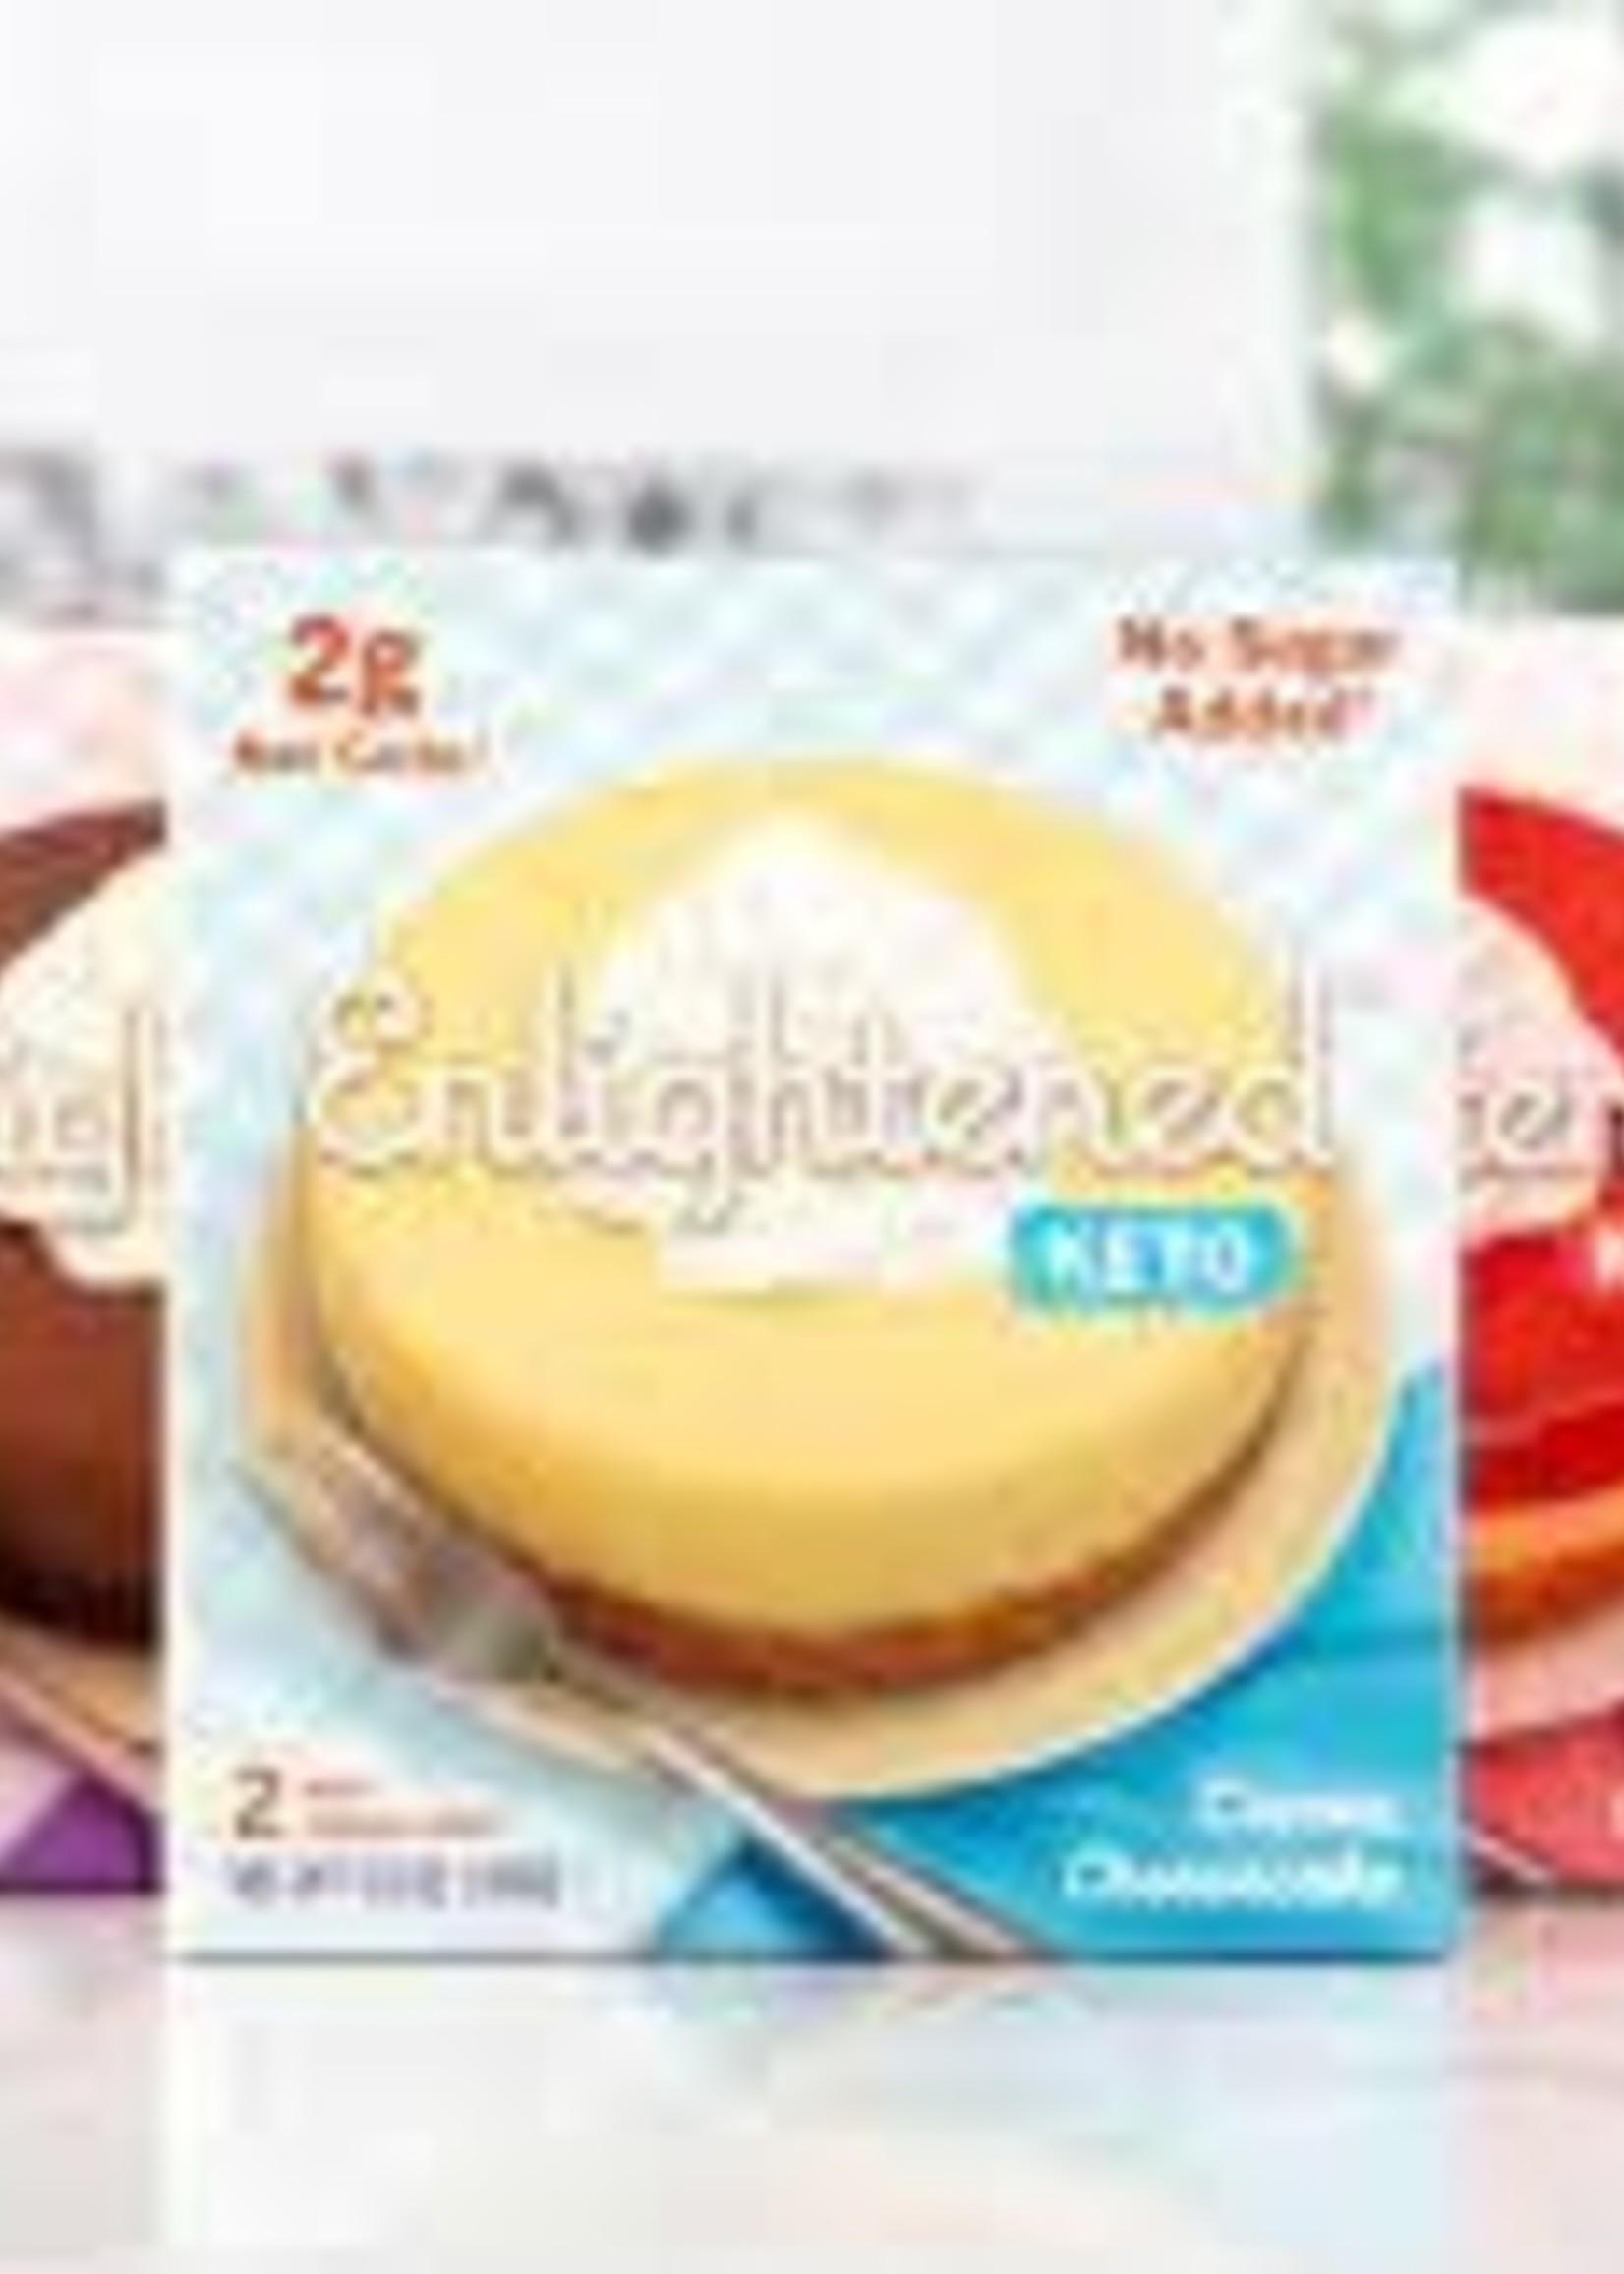 Enlightened Gateaux au fromage  (2) 160g - Enlightened